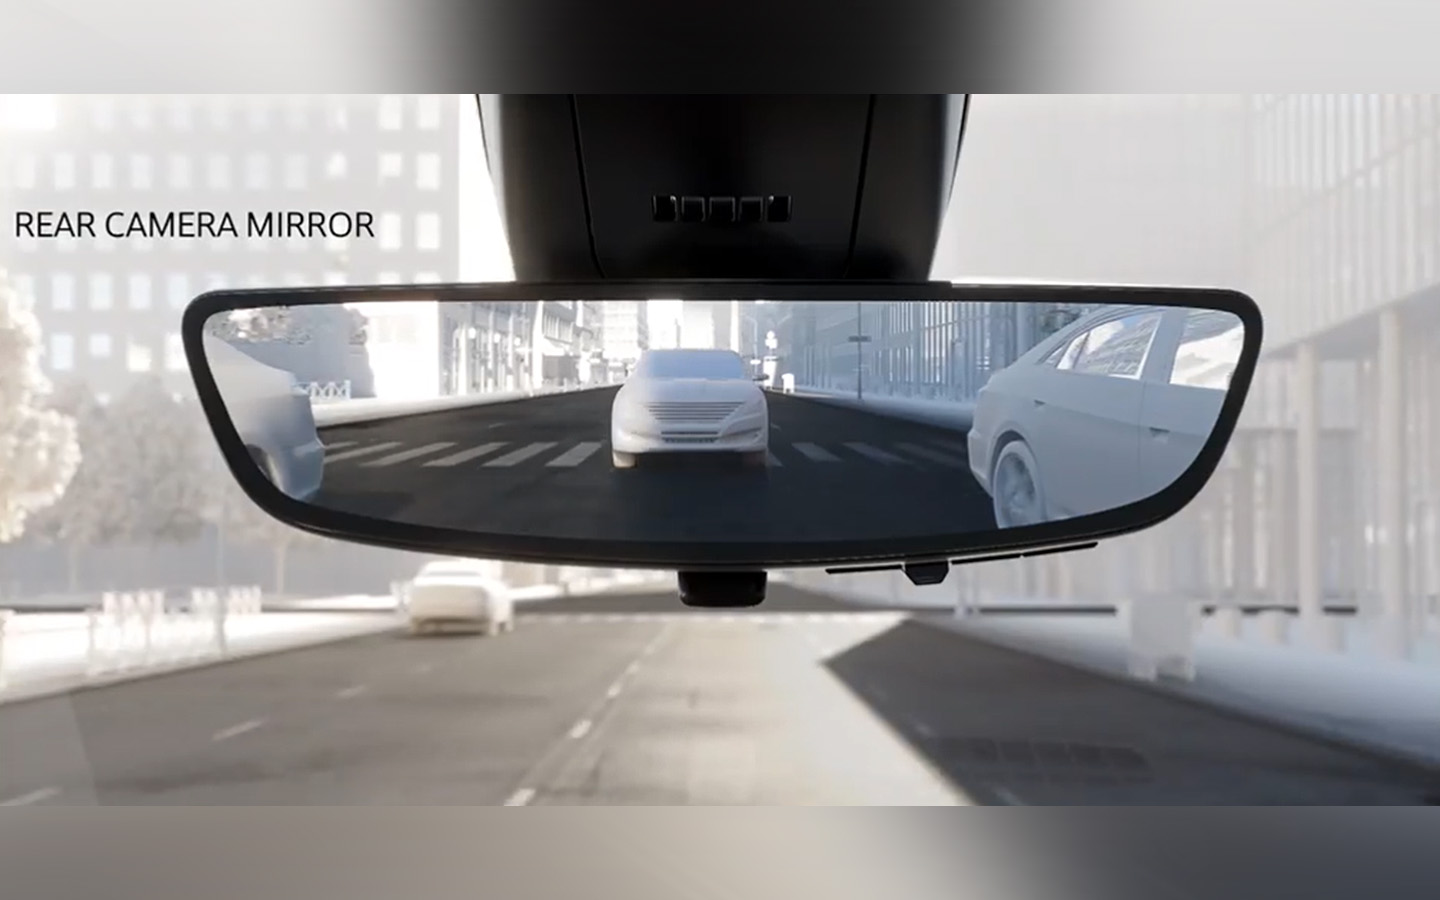 Rear view camera feature of GMC Safety